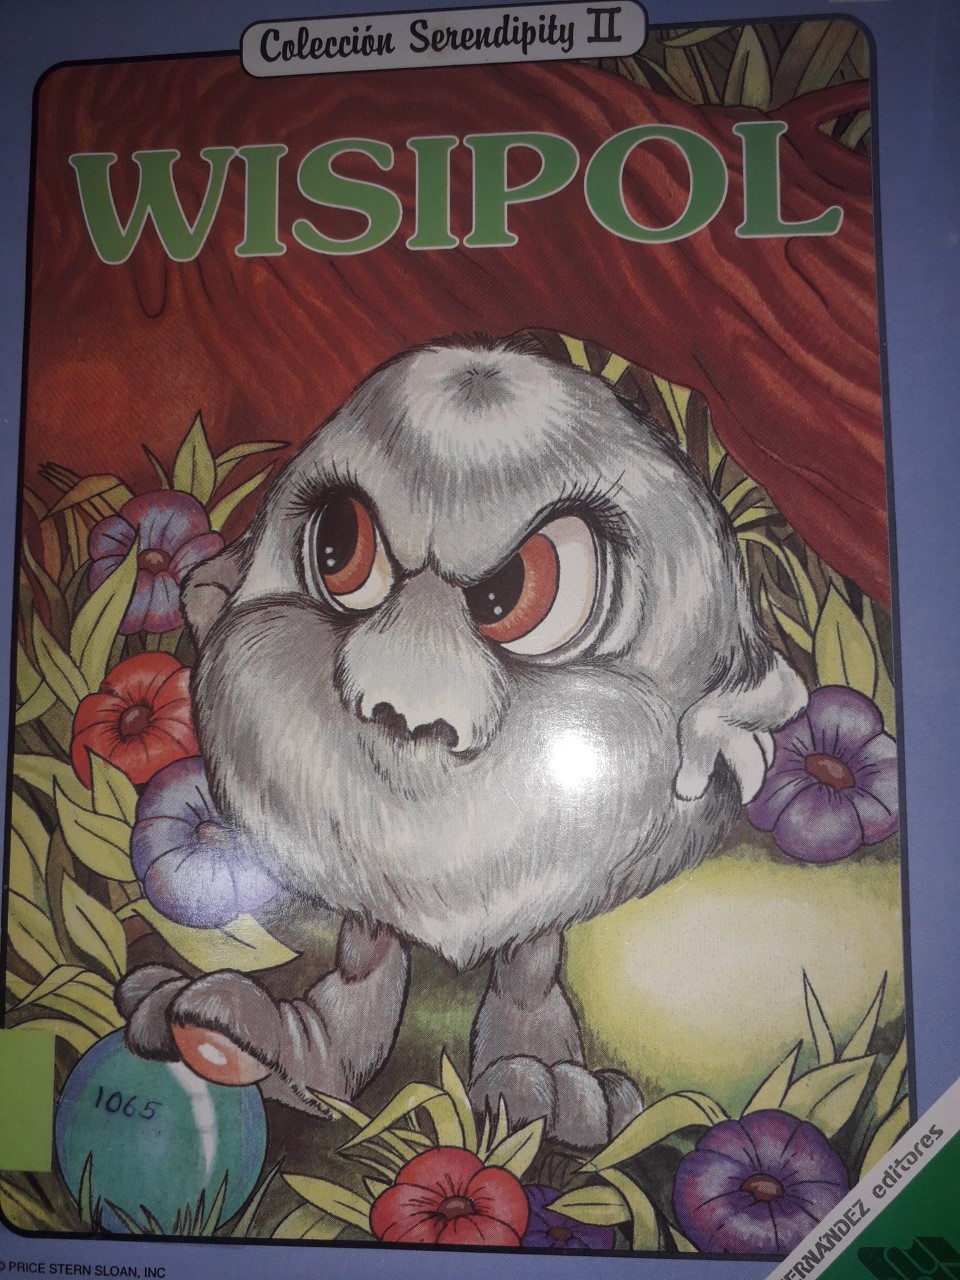 WISIPOL